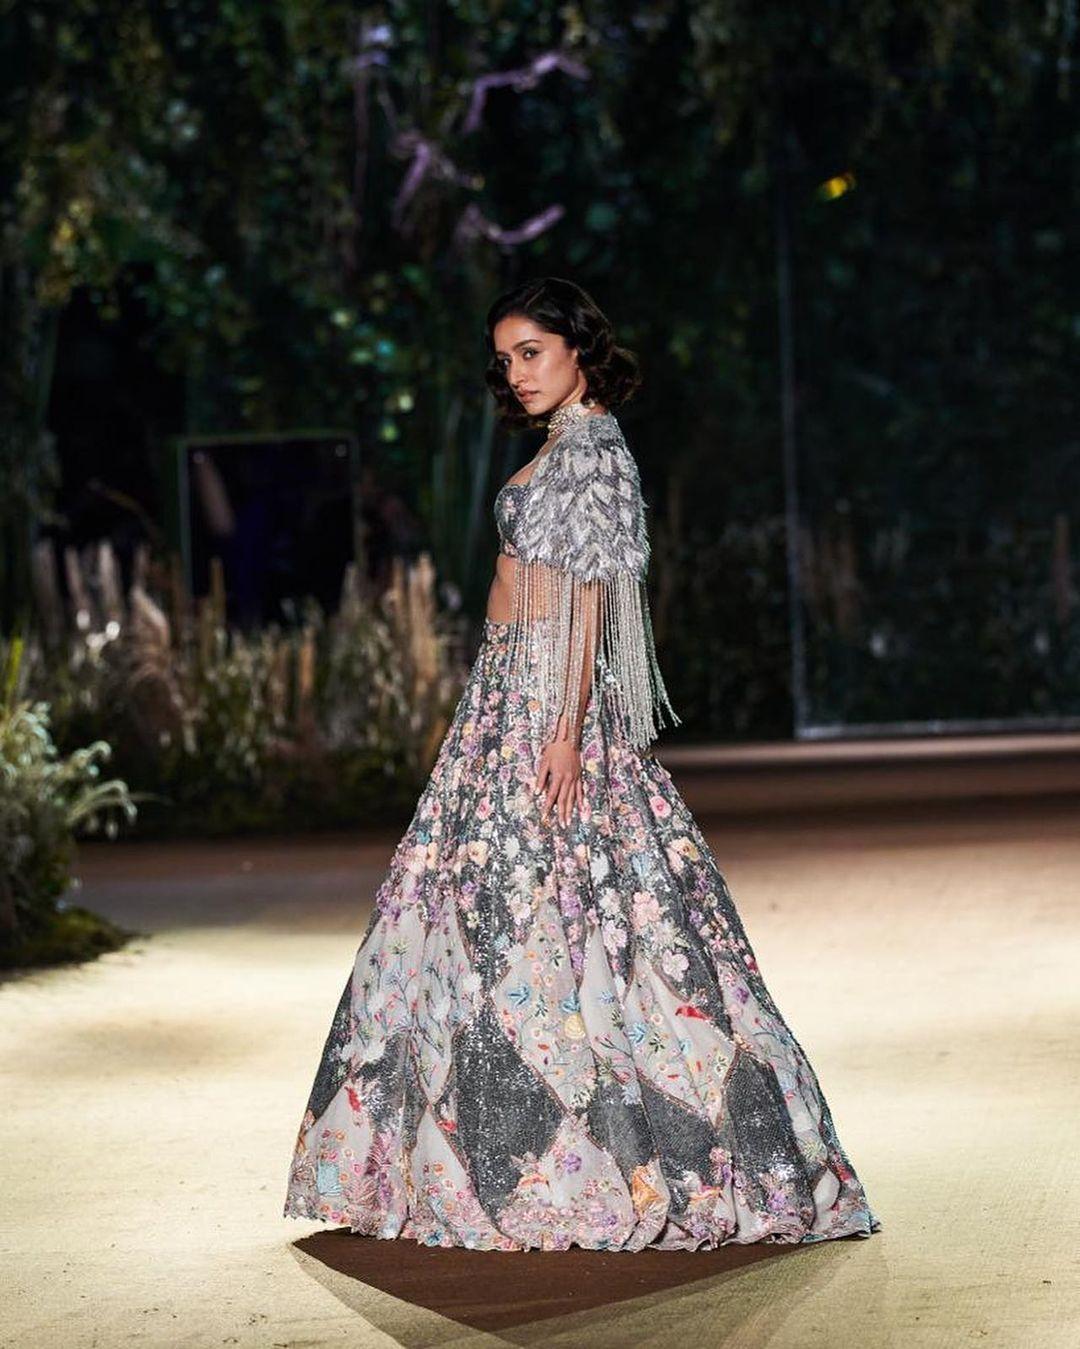 The show's highlight was an exquisite silver glittery lehenga, elegantly paired with a tassel crop jacket adorned with the designer's distinct sequin detailing.